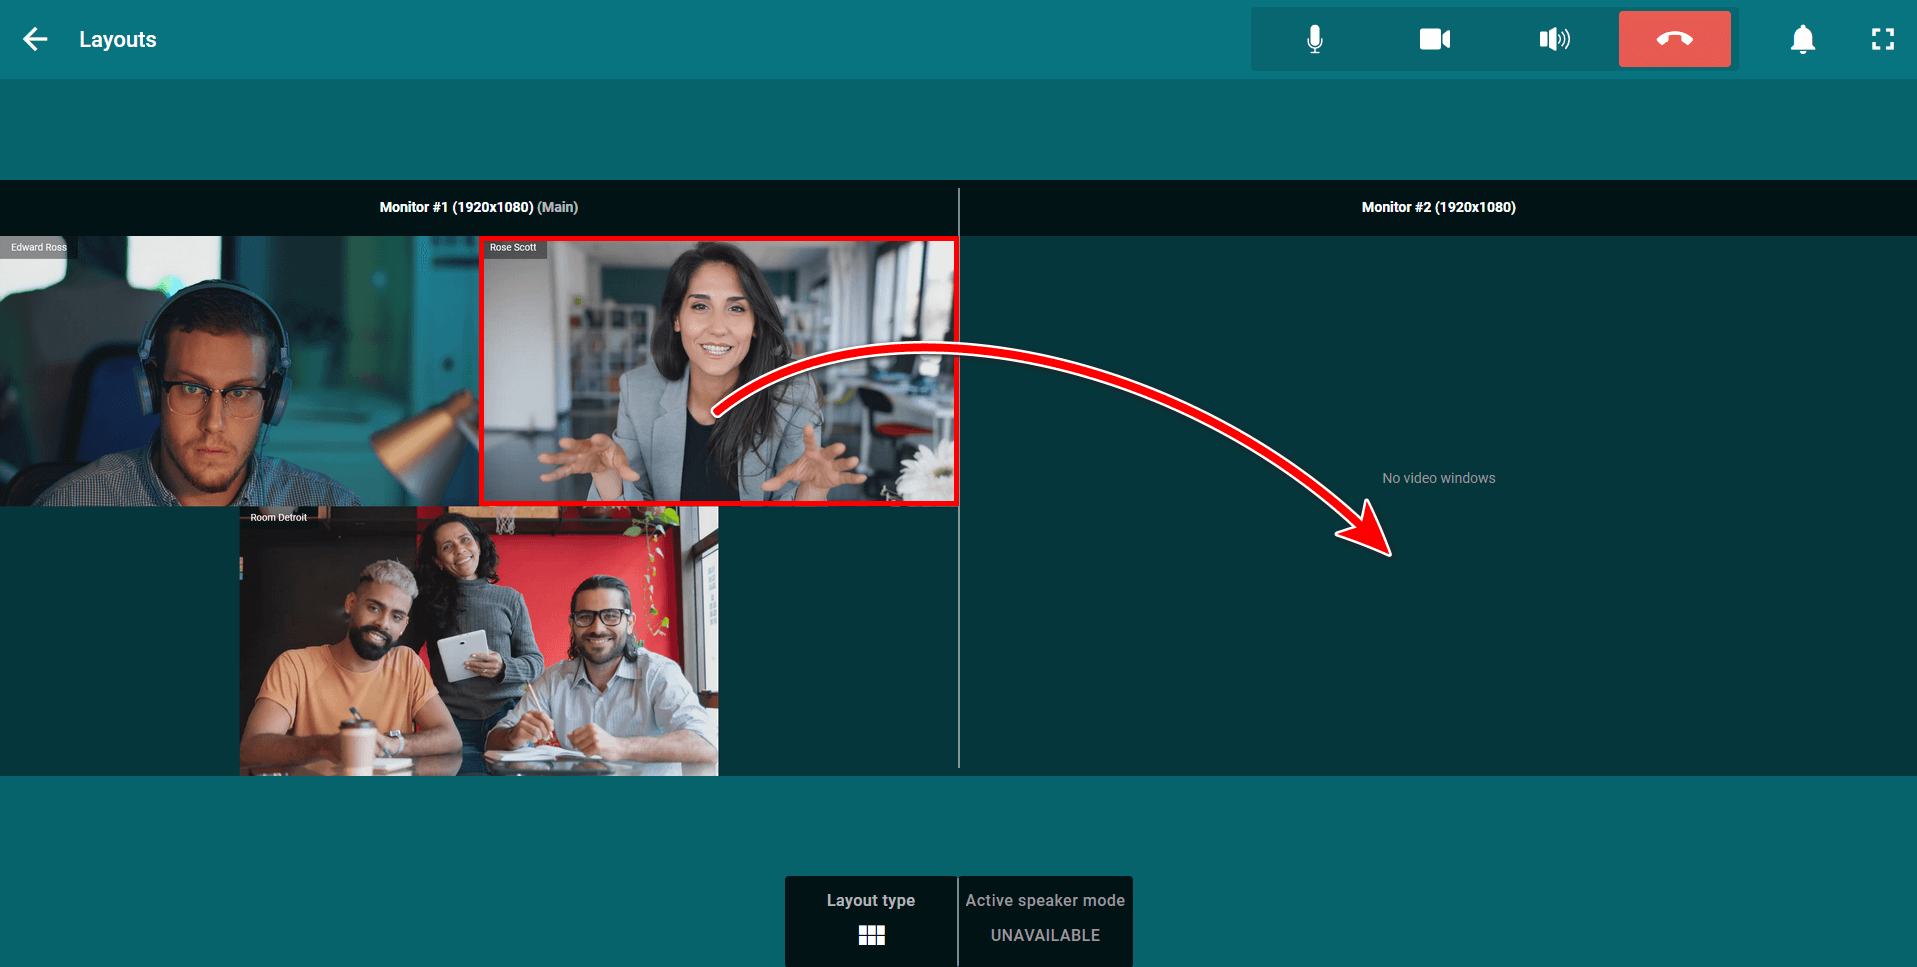 TrueConf Room 4.0 Update: New UI and Real-Time Meeting Management 7